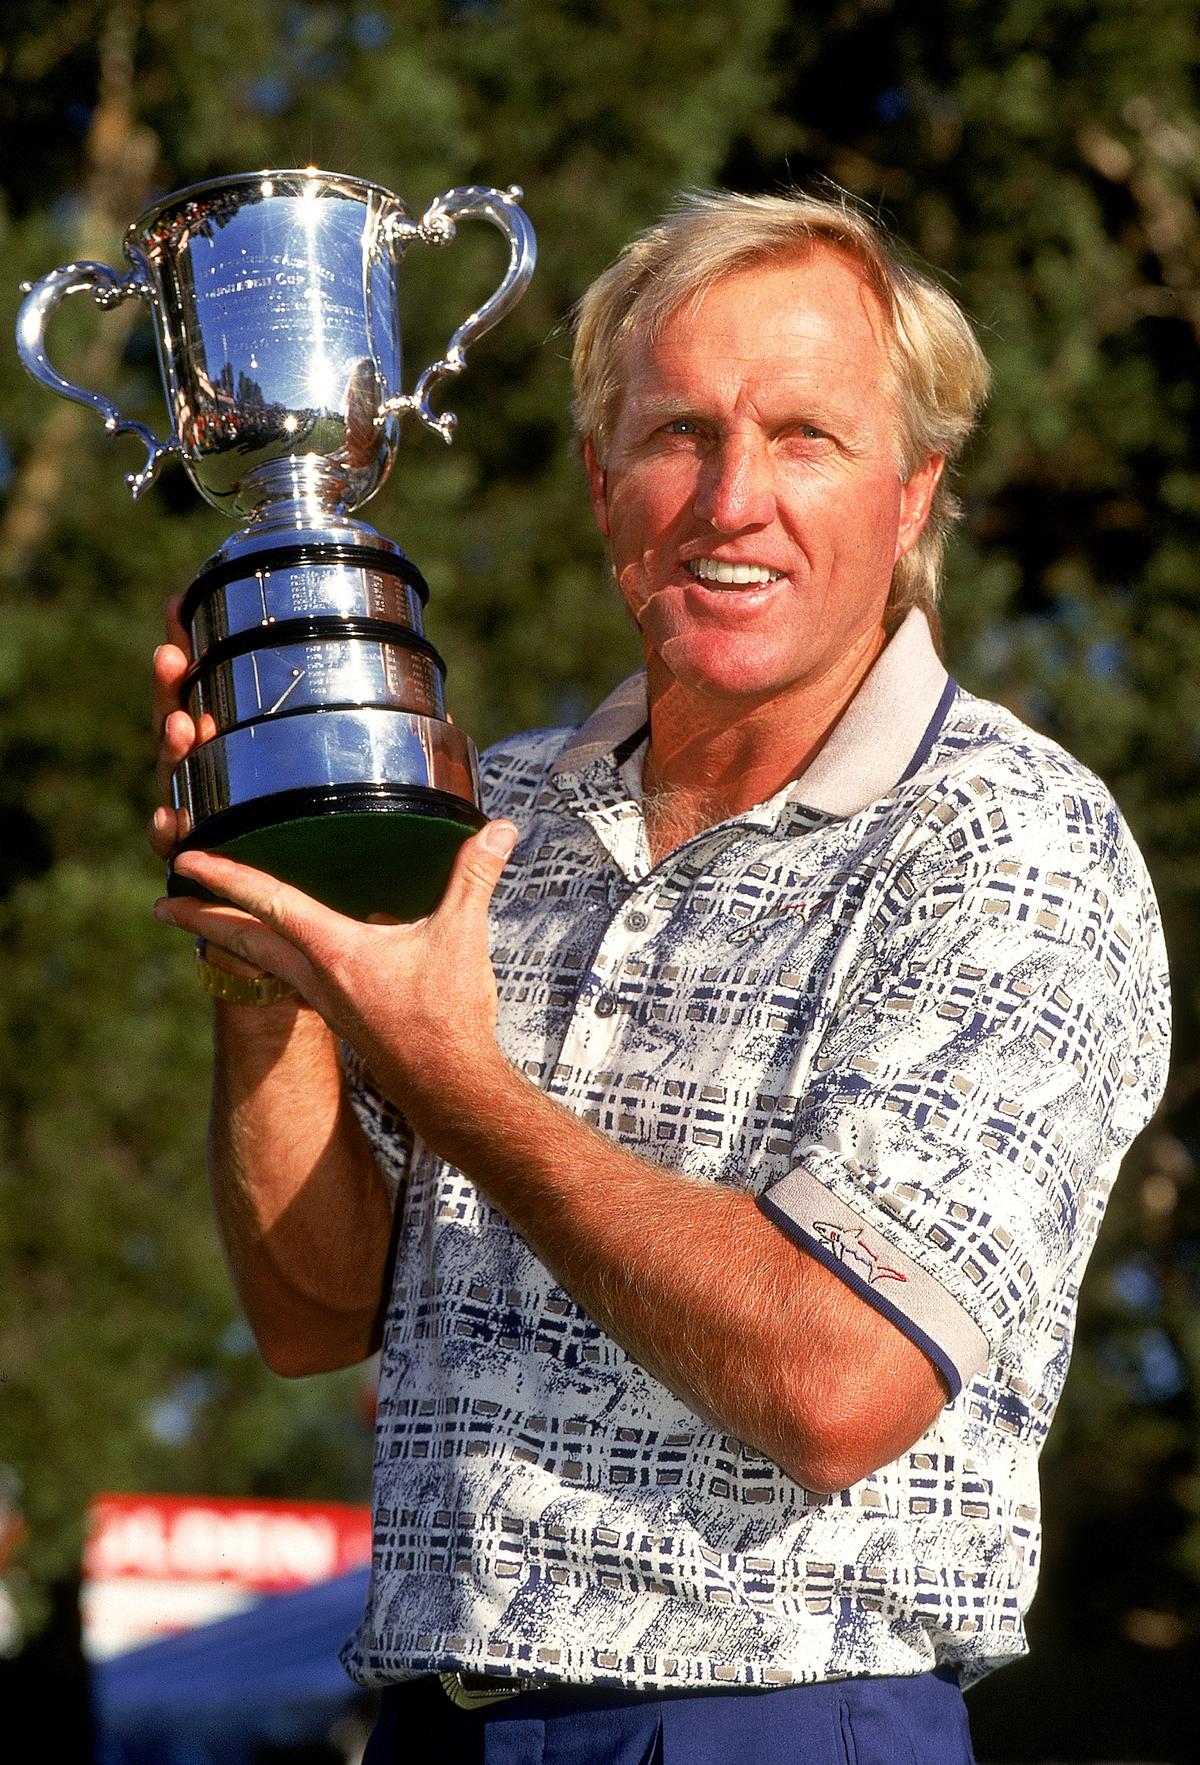 Greg Norman, of Australia, holds aloft the trophy after winning the Australian Open played at the Lakes Golf Course on Feb. 4, 2000, in Sydney, Australia. (Getty Images)